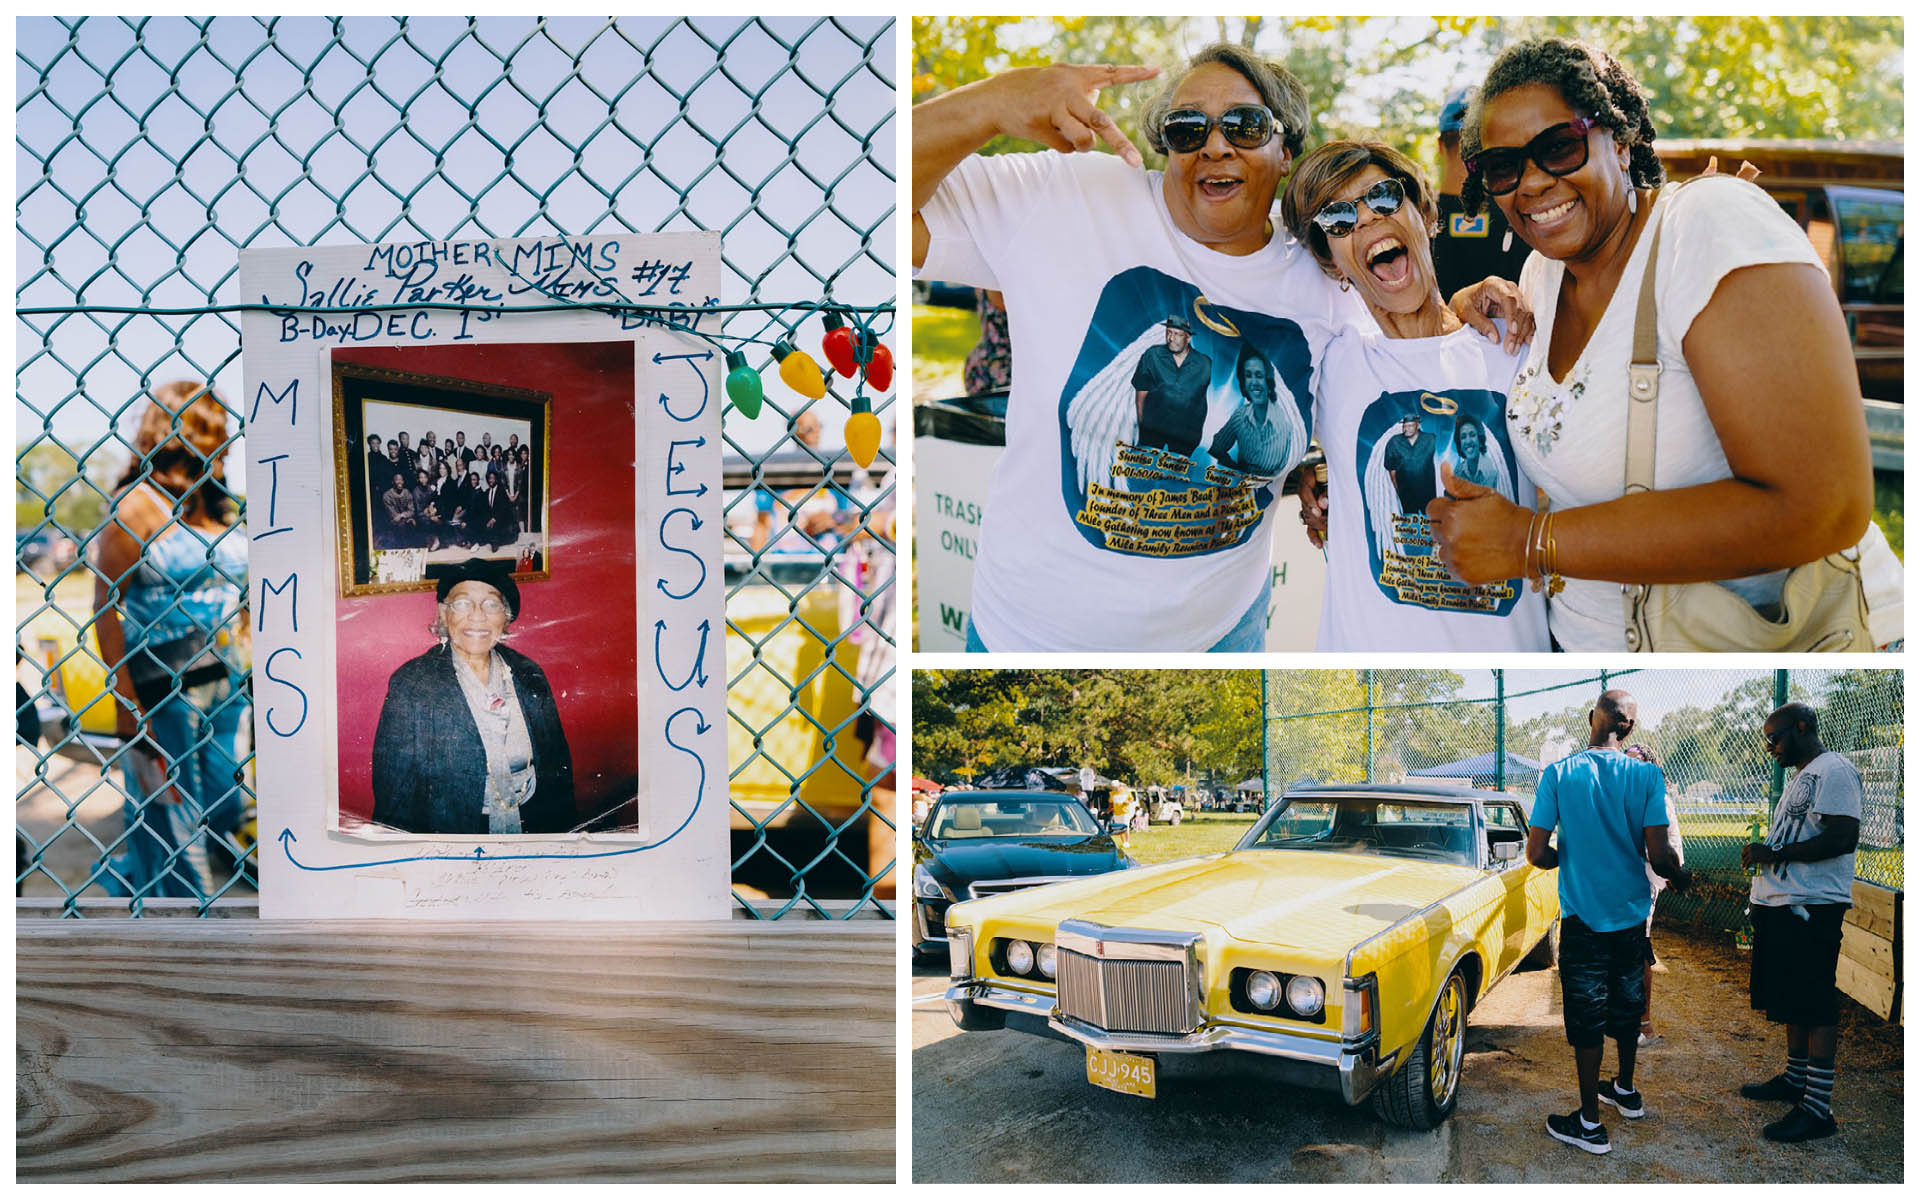 Mother Mims Memorial, Smiling friends, and a Classic car